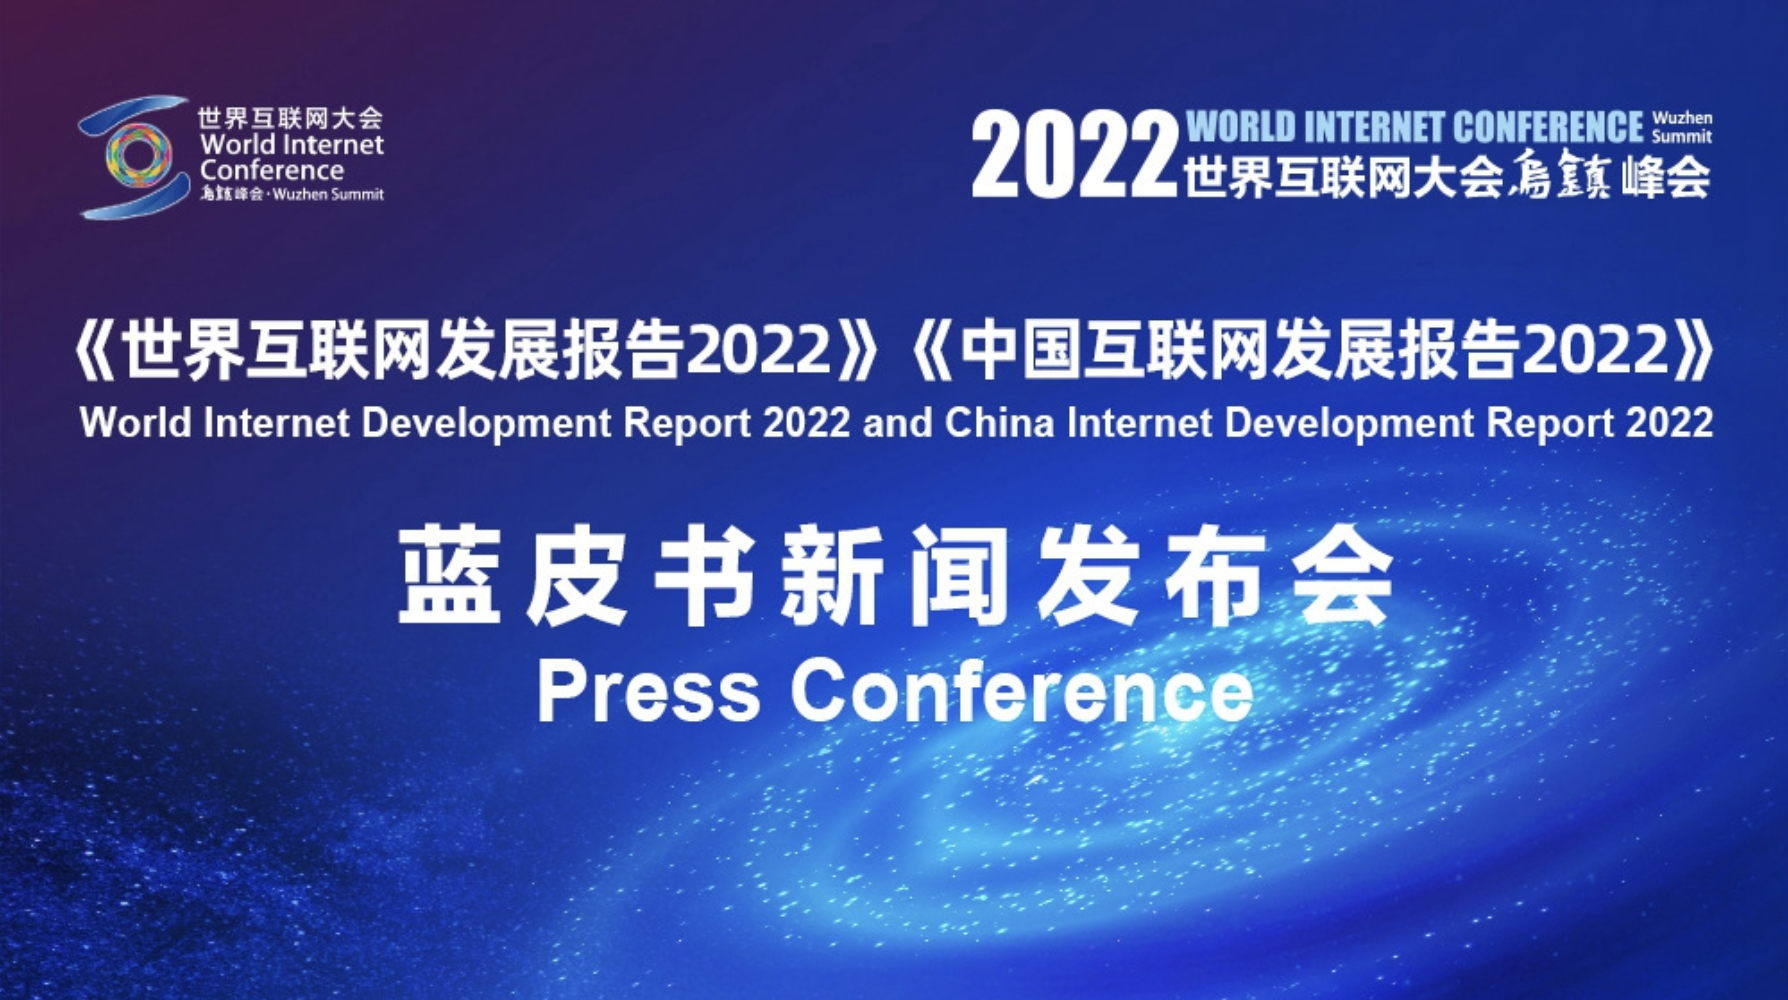 Bluebook of 2022 World Internet Conference Photo: screenshot of WIC